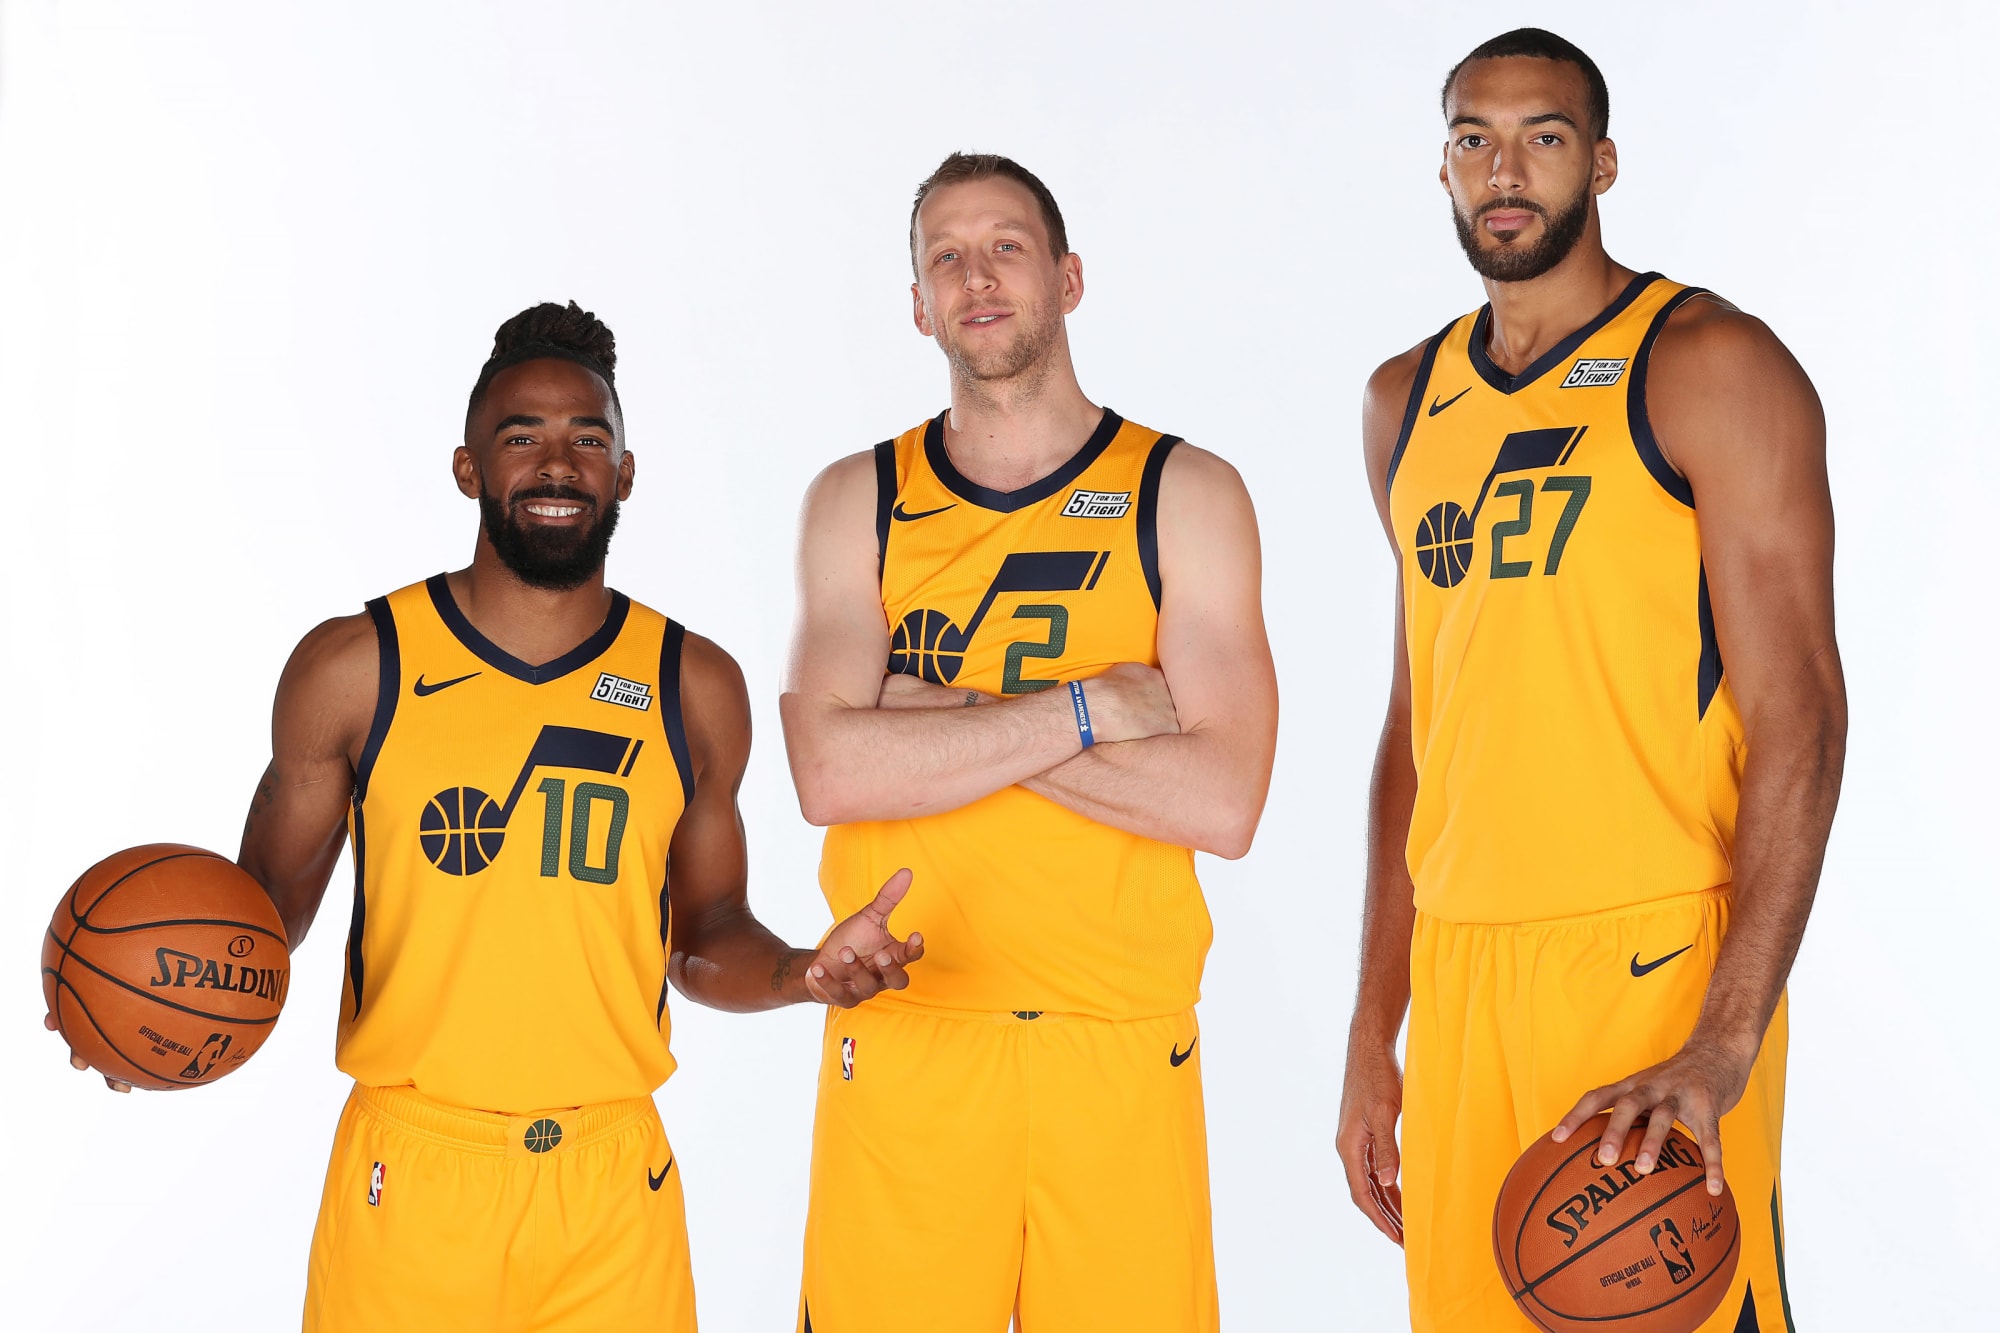 Top 5 New NBA Uniforms for 2019-20